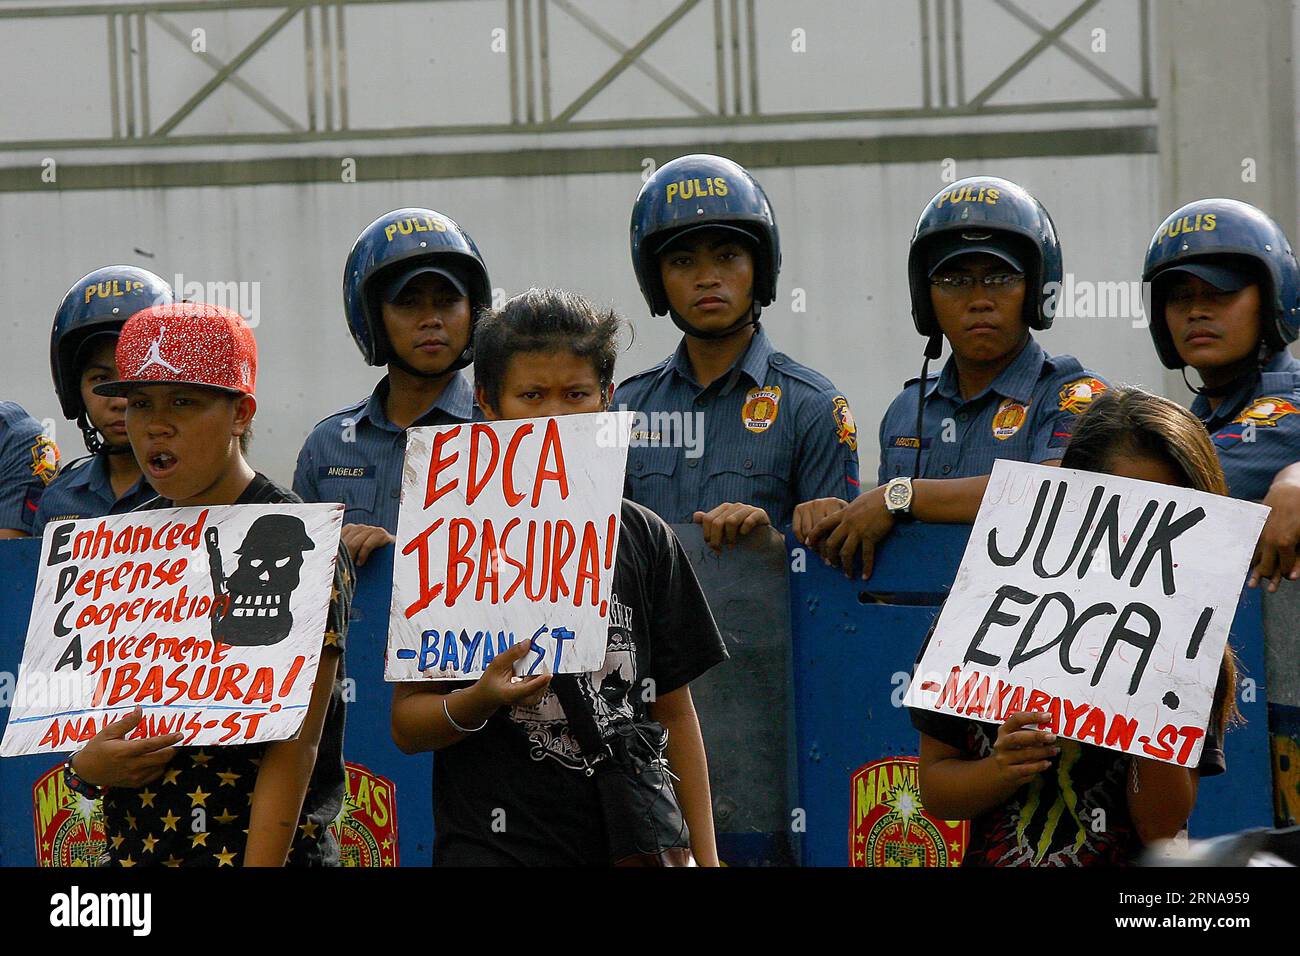 Protest vor US-Botschaft in Manila (160114) -- MANILA, Jan. 14, 2016 -- Activists hold placards during a protest rally in front of the U.S. Embassy in Manila, the Philippines, Jan. 14, 2016. The activists are calling for an end to the Enhanced Defense Cooperation Agreement (EDCA) after the Philippine Supreme Court decided that the Philippines defense cooperation deal with the United States is constitutional and does not need the concurrence of the Senate. ) (zjy) PHILIPPINES-MANILA-ANTI-EDCA-PROTEST RouellexUmali PUBLICATIONxNOTxINxCHN   Protest before U.S. Embassy in Manila 160114 Manila Jan Stock Photo